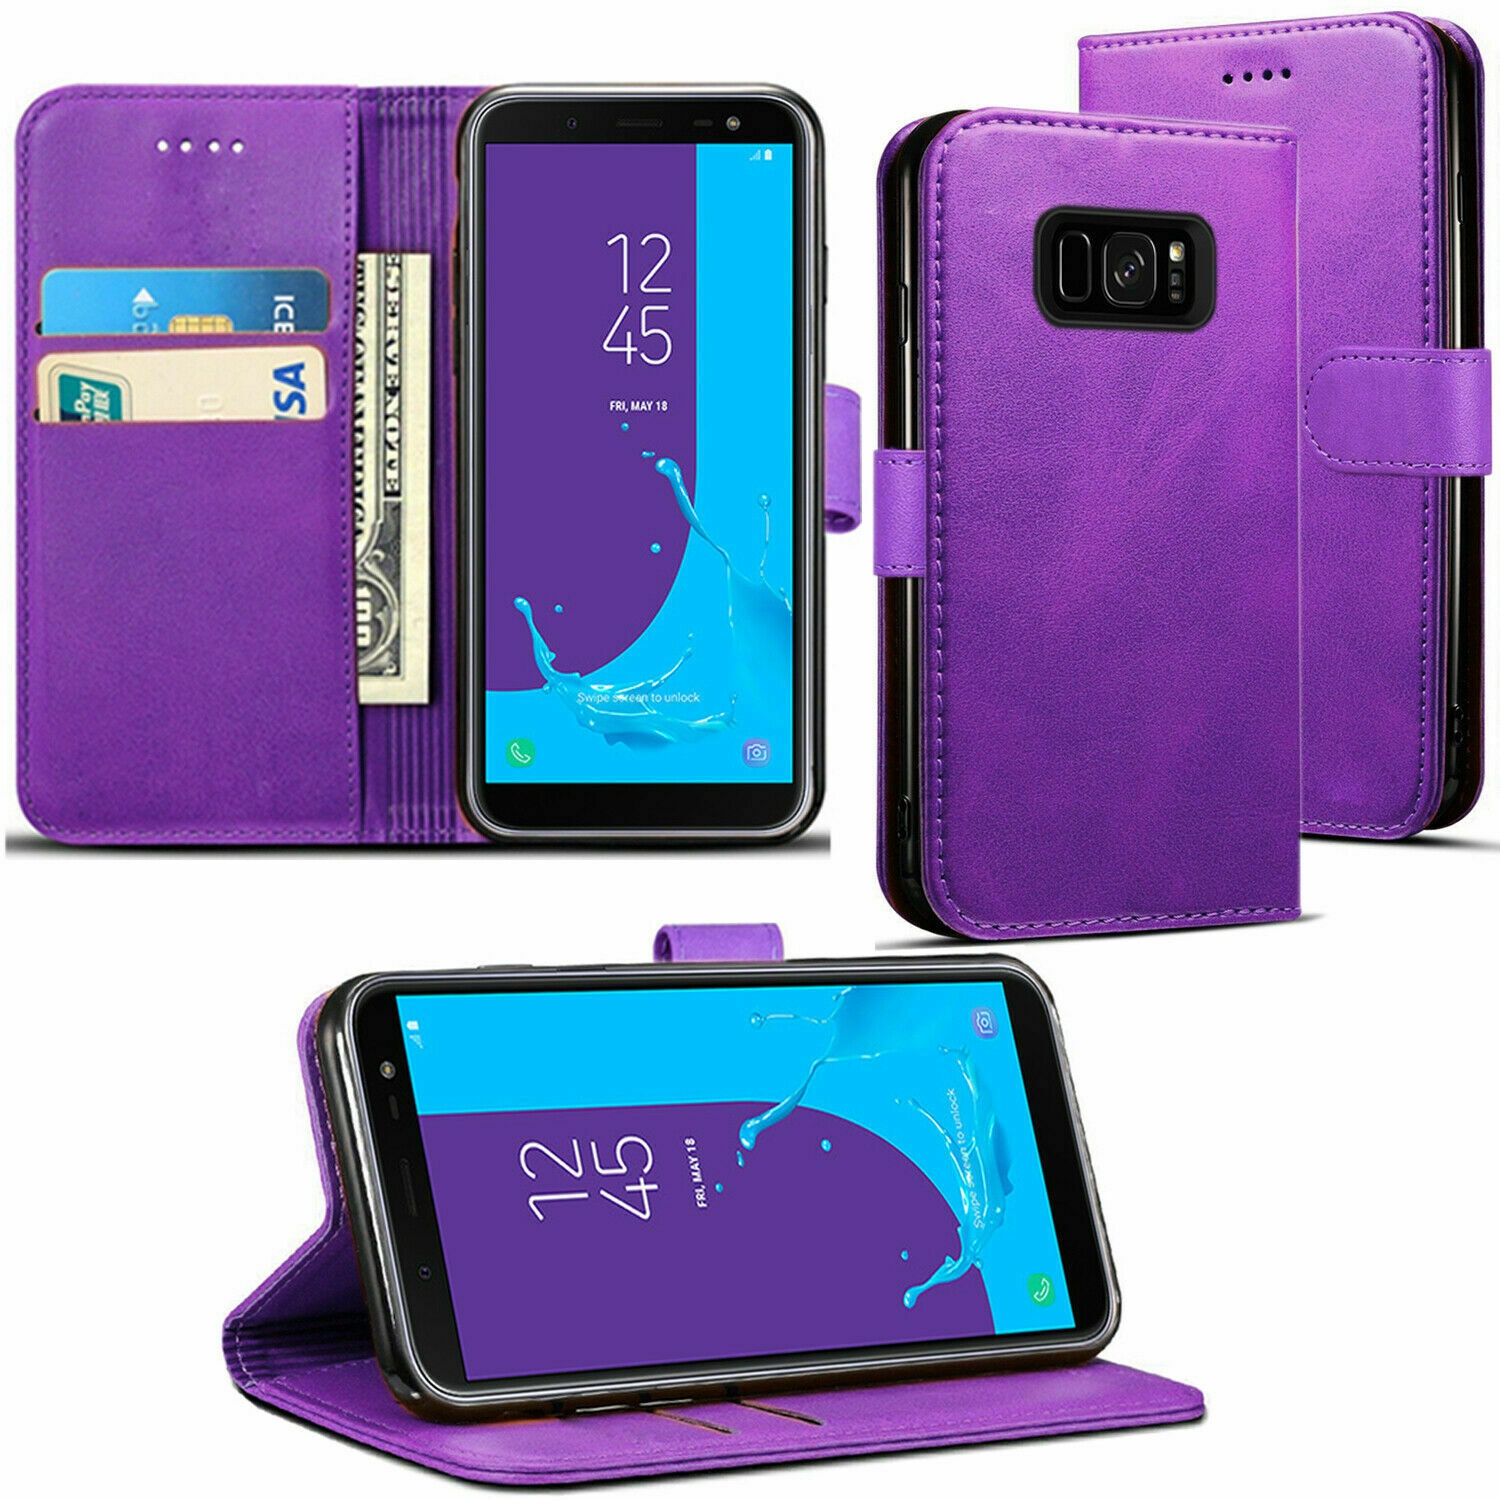 【CSmart】 Magnetic Card Slot Leather Folio Wallet Flip Case Cover for Samsung Galaxy S7, Purple